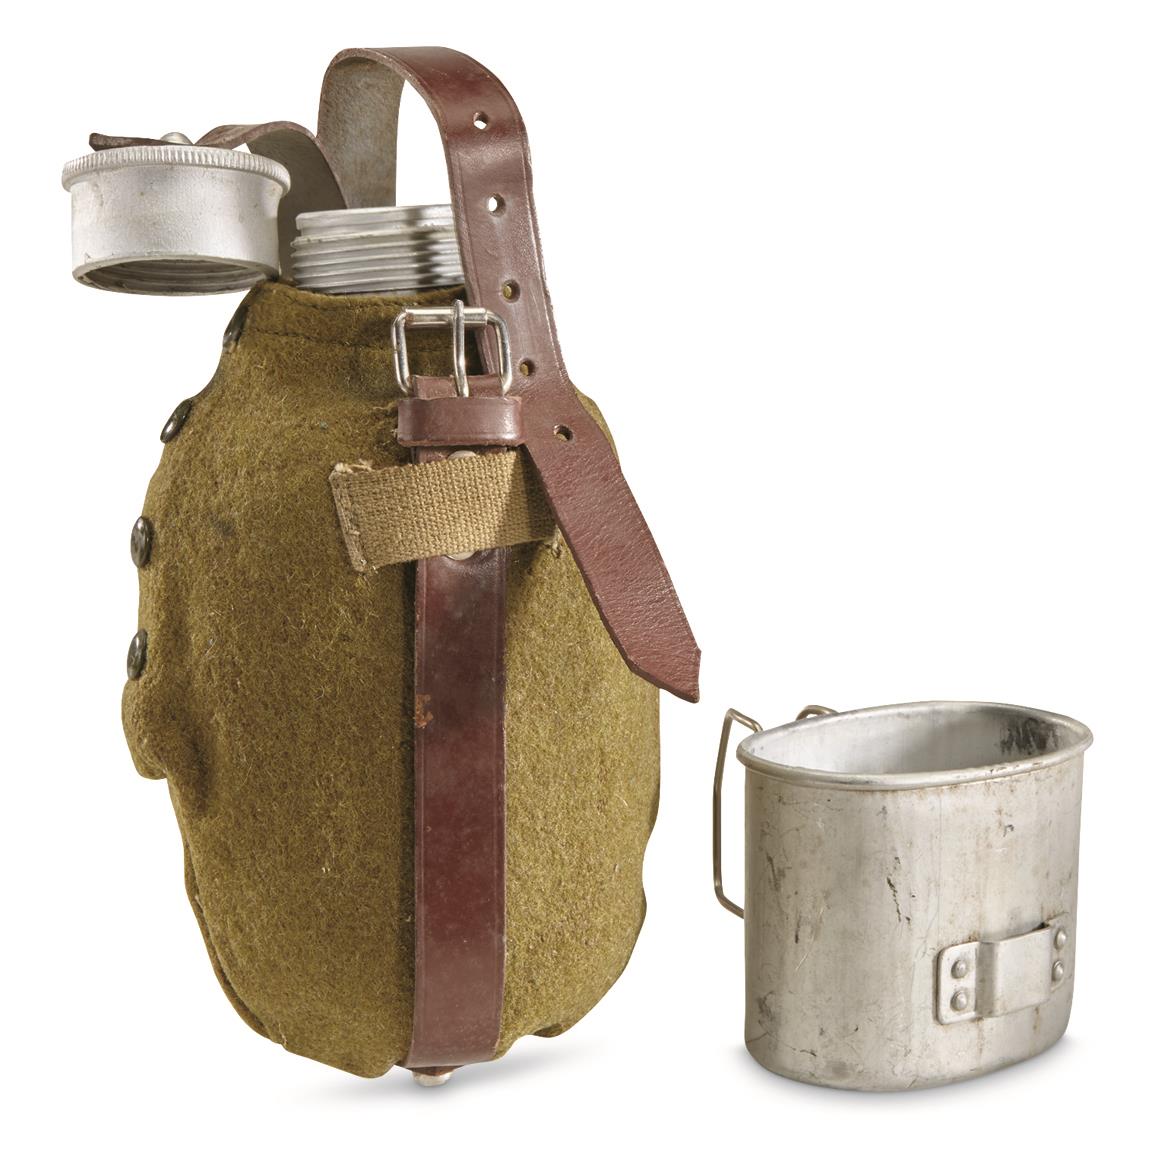 Romanian Military Surplus Canteen with Wool Cover and Cup, Like New